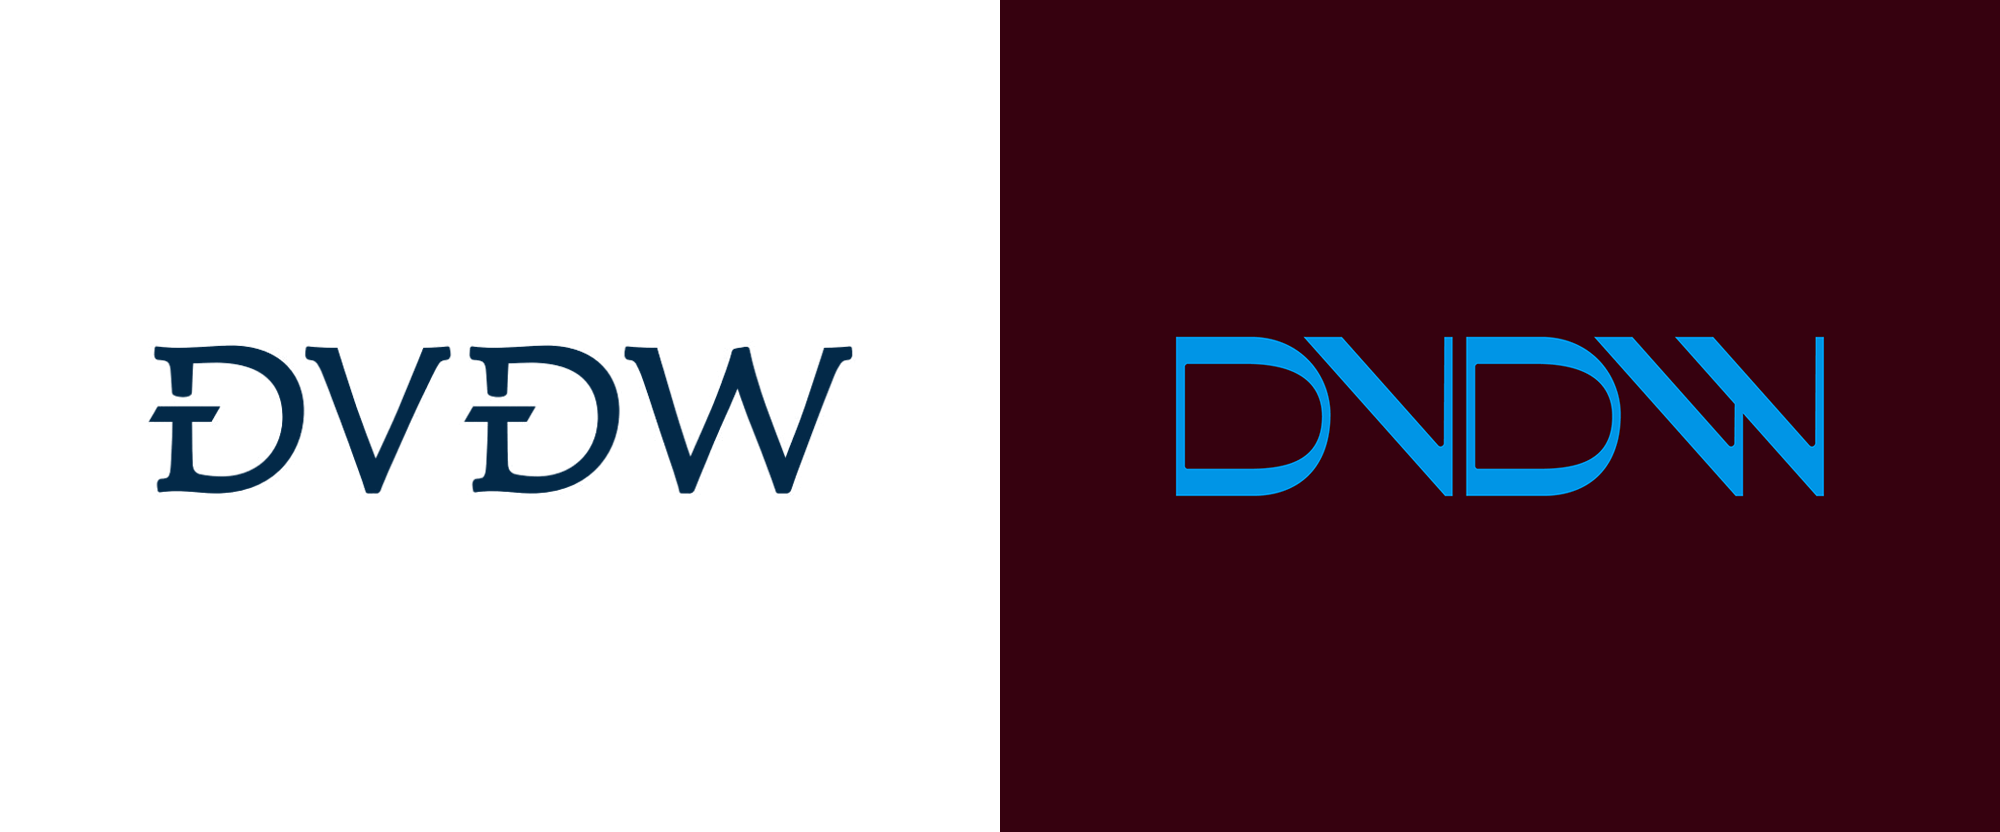 New Logo and Identity for DVDW by Studio Dumbar